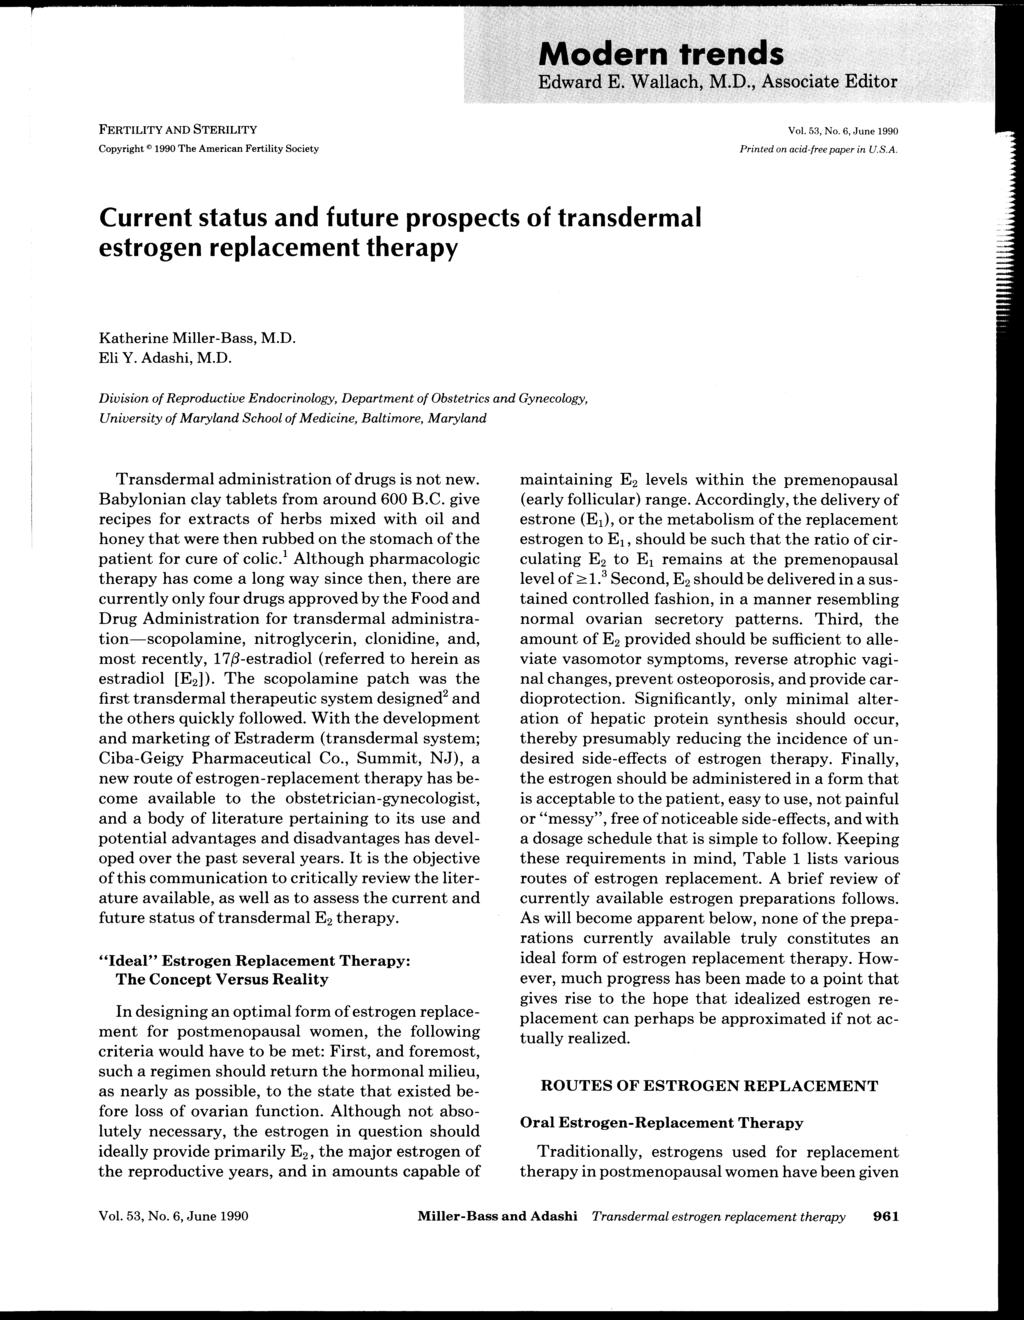 FERTILITY AND STERILITY Copyright e 1990 The American Fertility Society Vol. 53, No.6, June 1990 Printed on acid-free paper in U.S.A. Current status and future prospects of transdermal estrogen replacement therapy Katherine Miller-Bass, M.